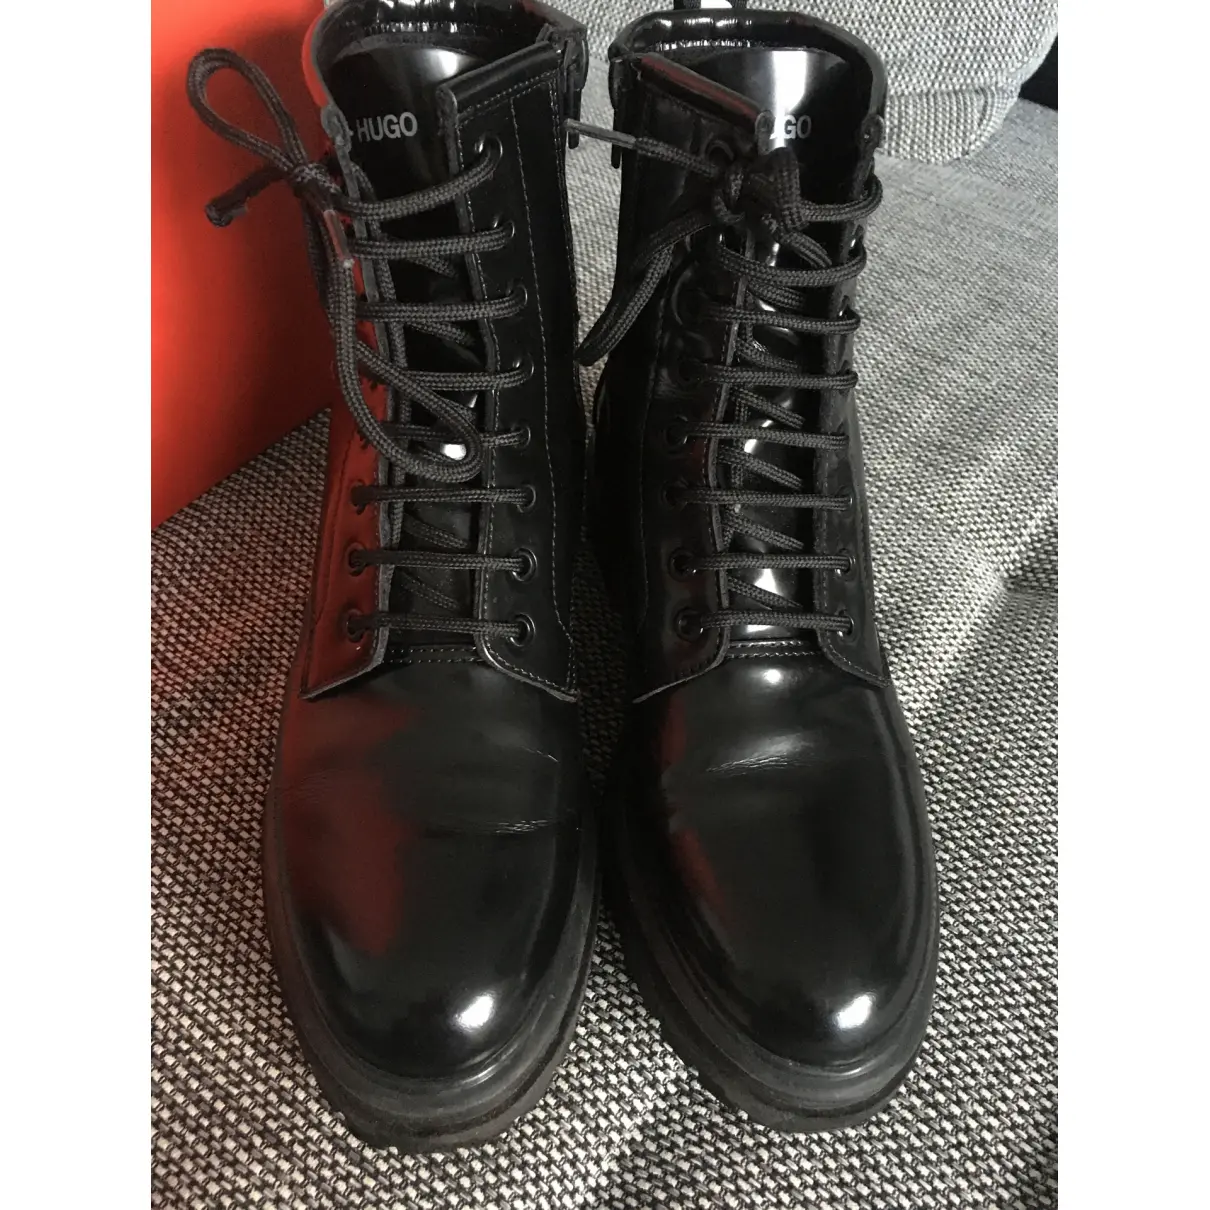 Patent leather ankle boots Hugo Boss